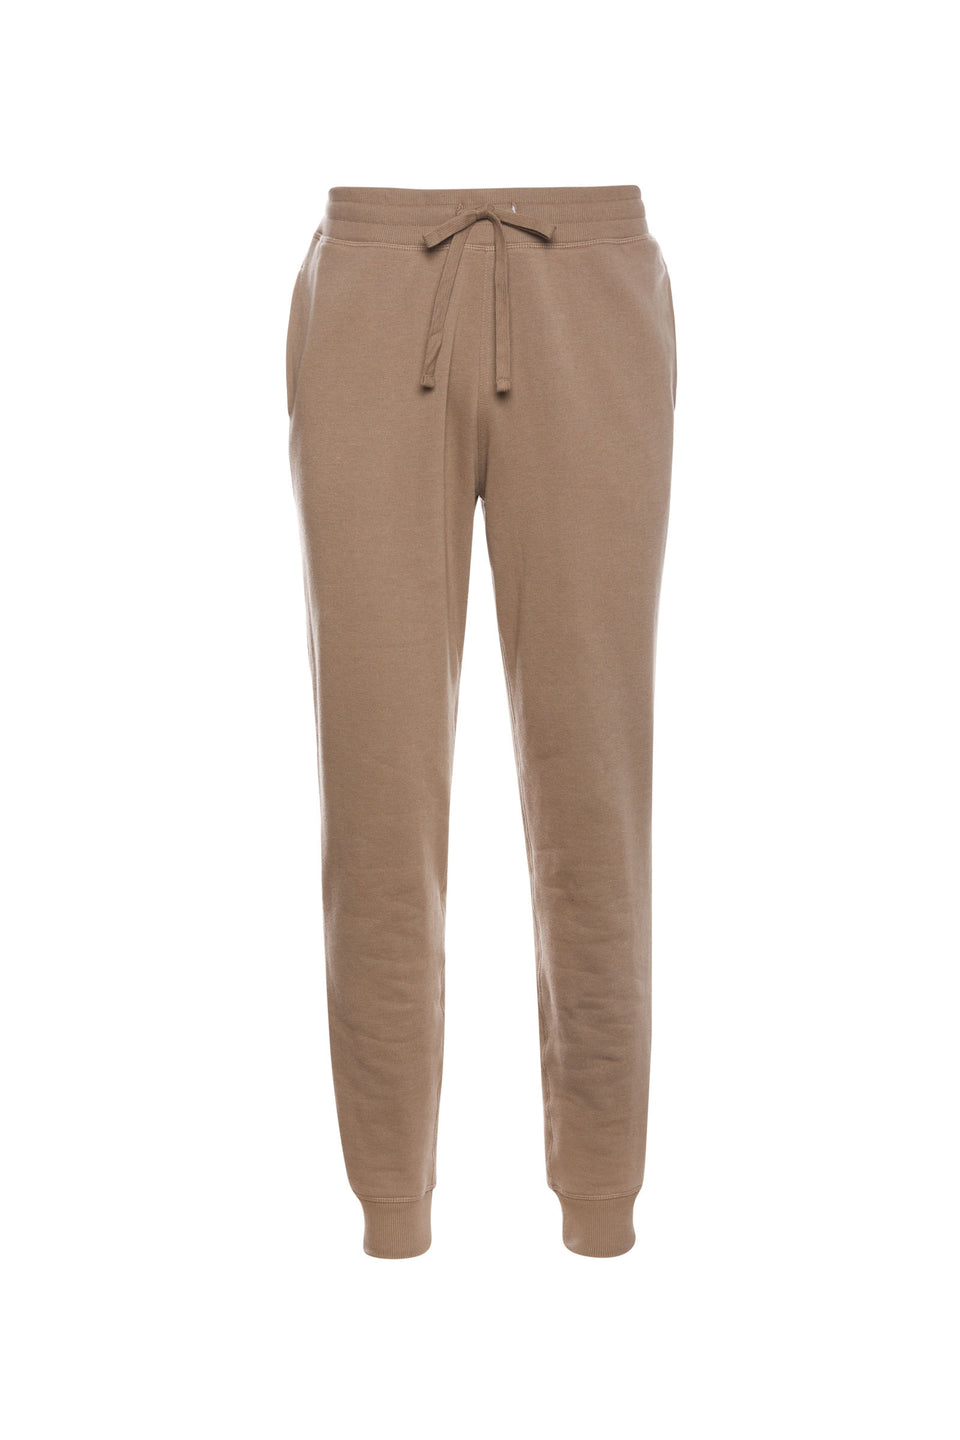 richer_poorer_recycled_sweatpants_warm_grey